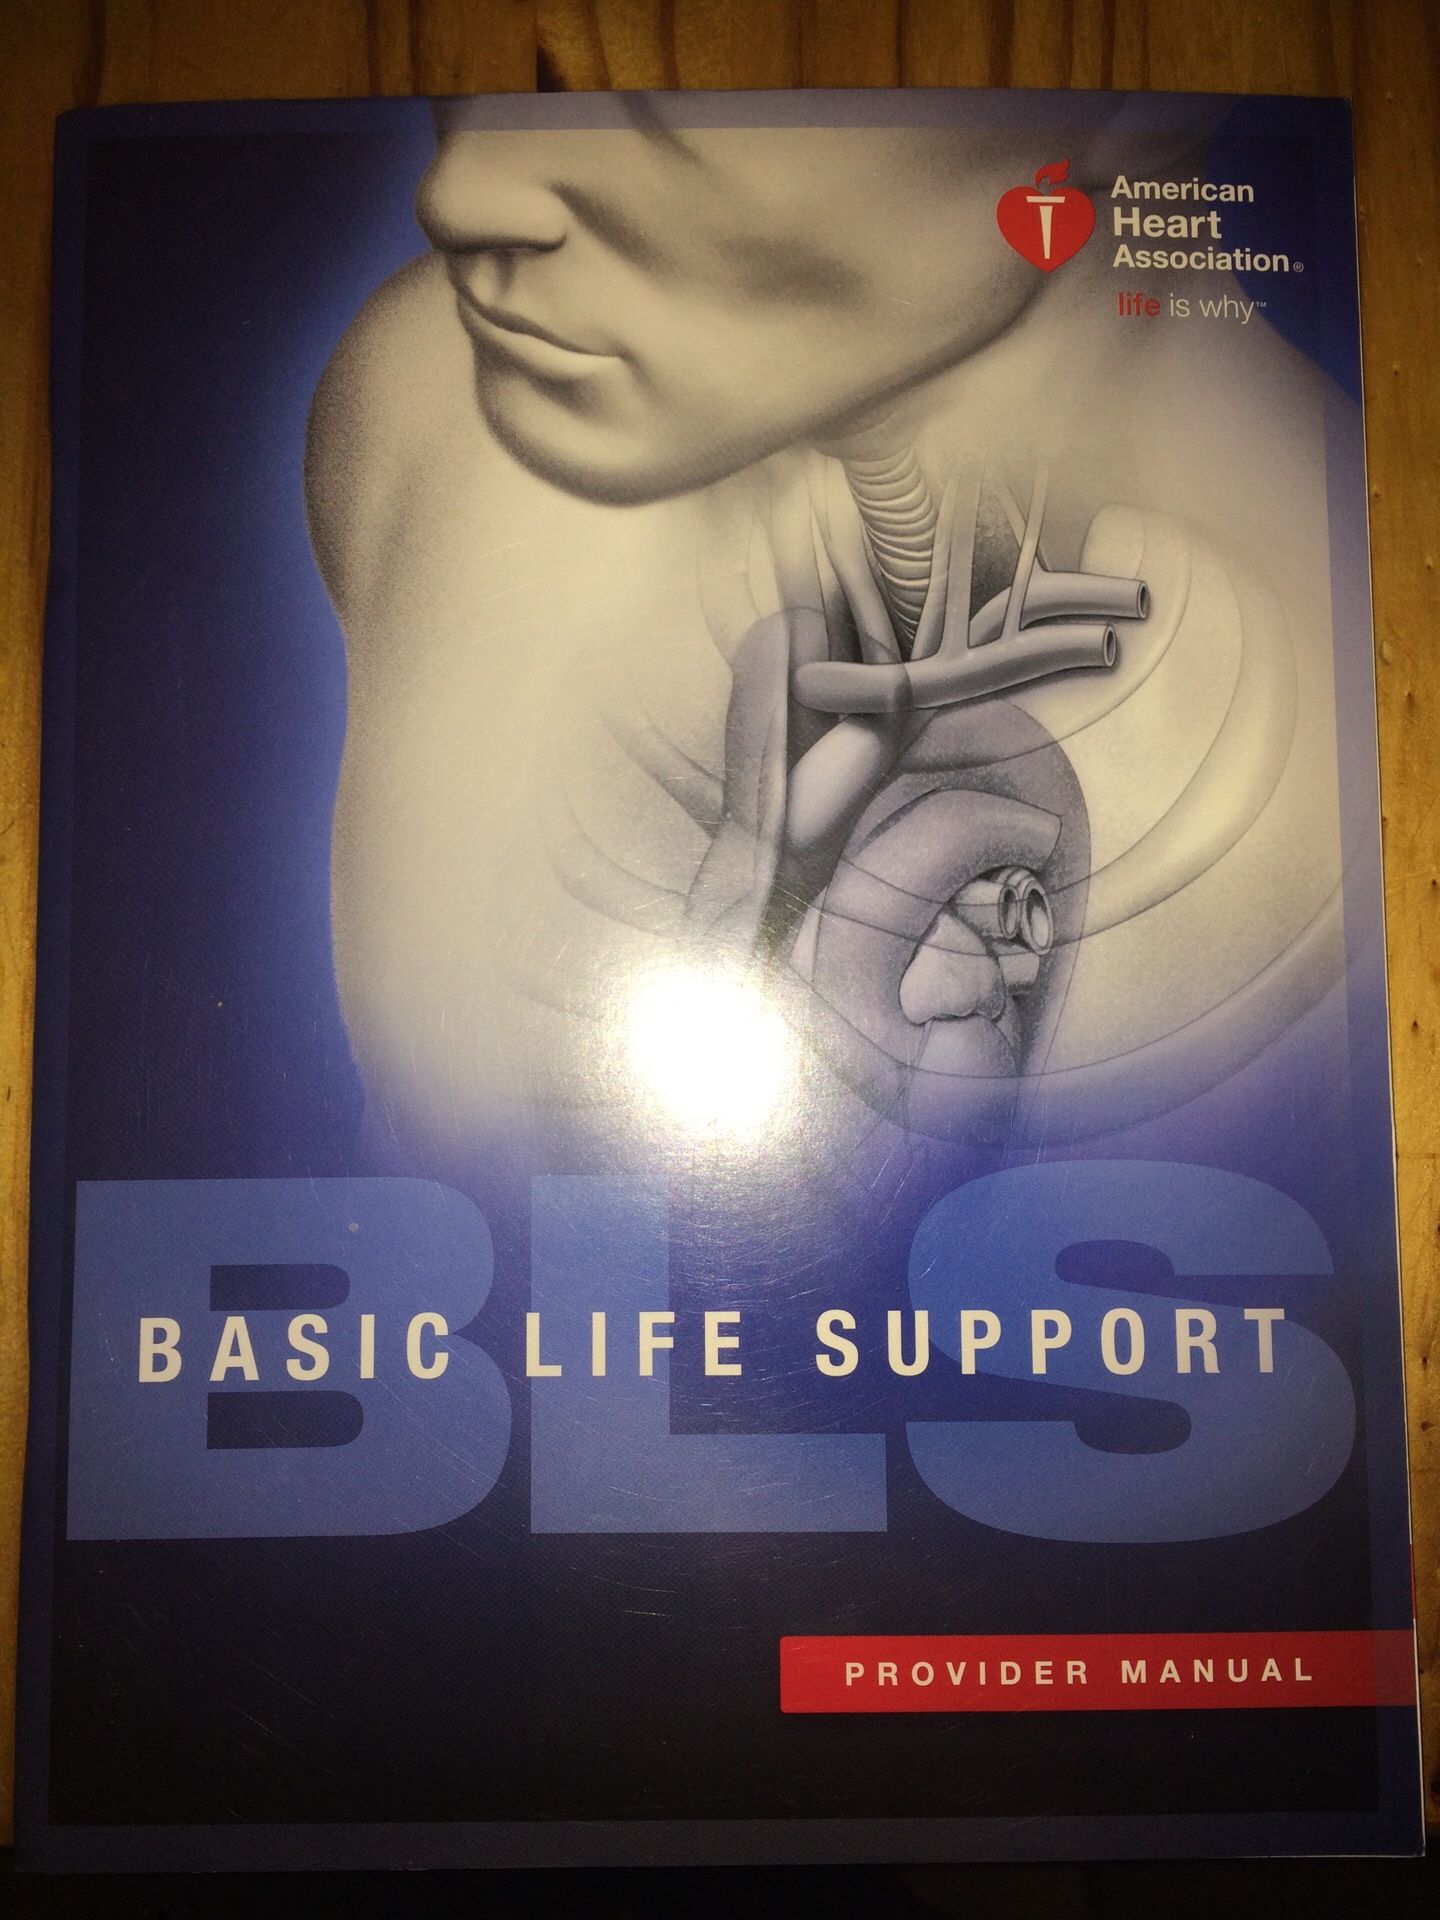 CPR for bls. Medical professionals cpr book